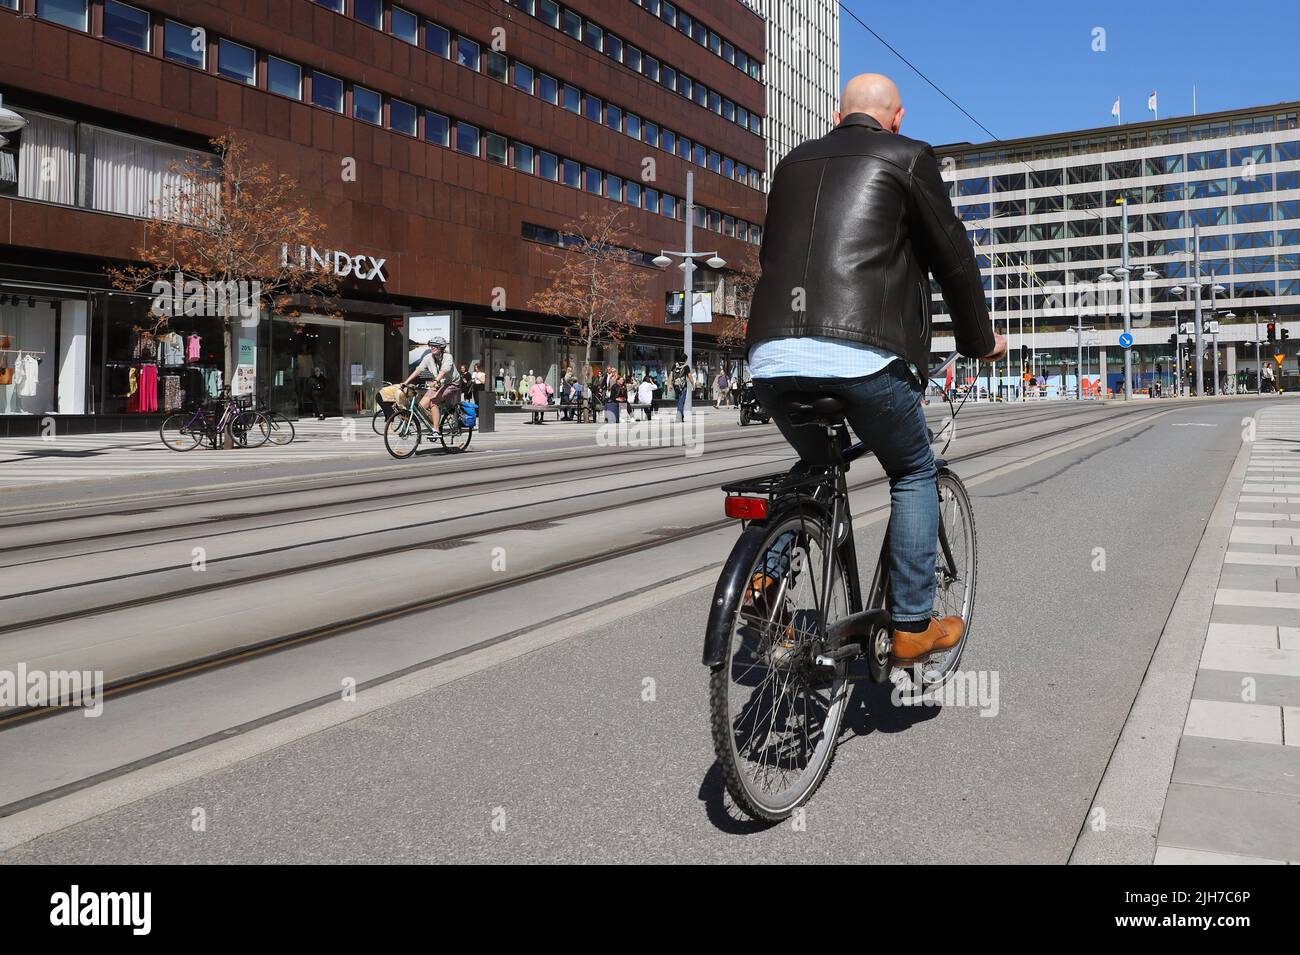 Stockholm, Sweden - May 12, 2021: Rear view of a male cyclist rides on the bike path on Klarabergsgatan street at Sergels torg square. Stock Photo